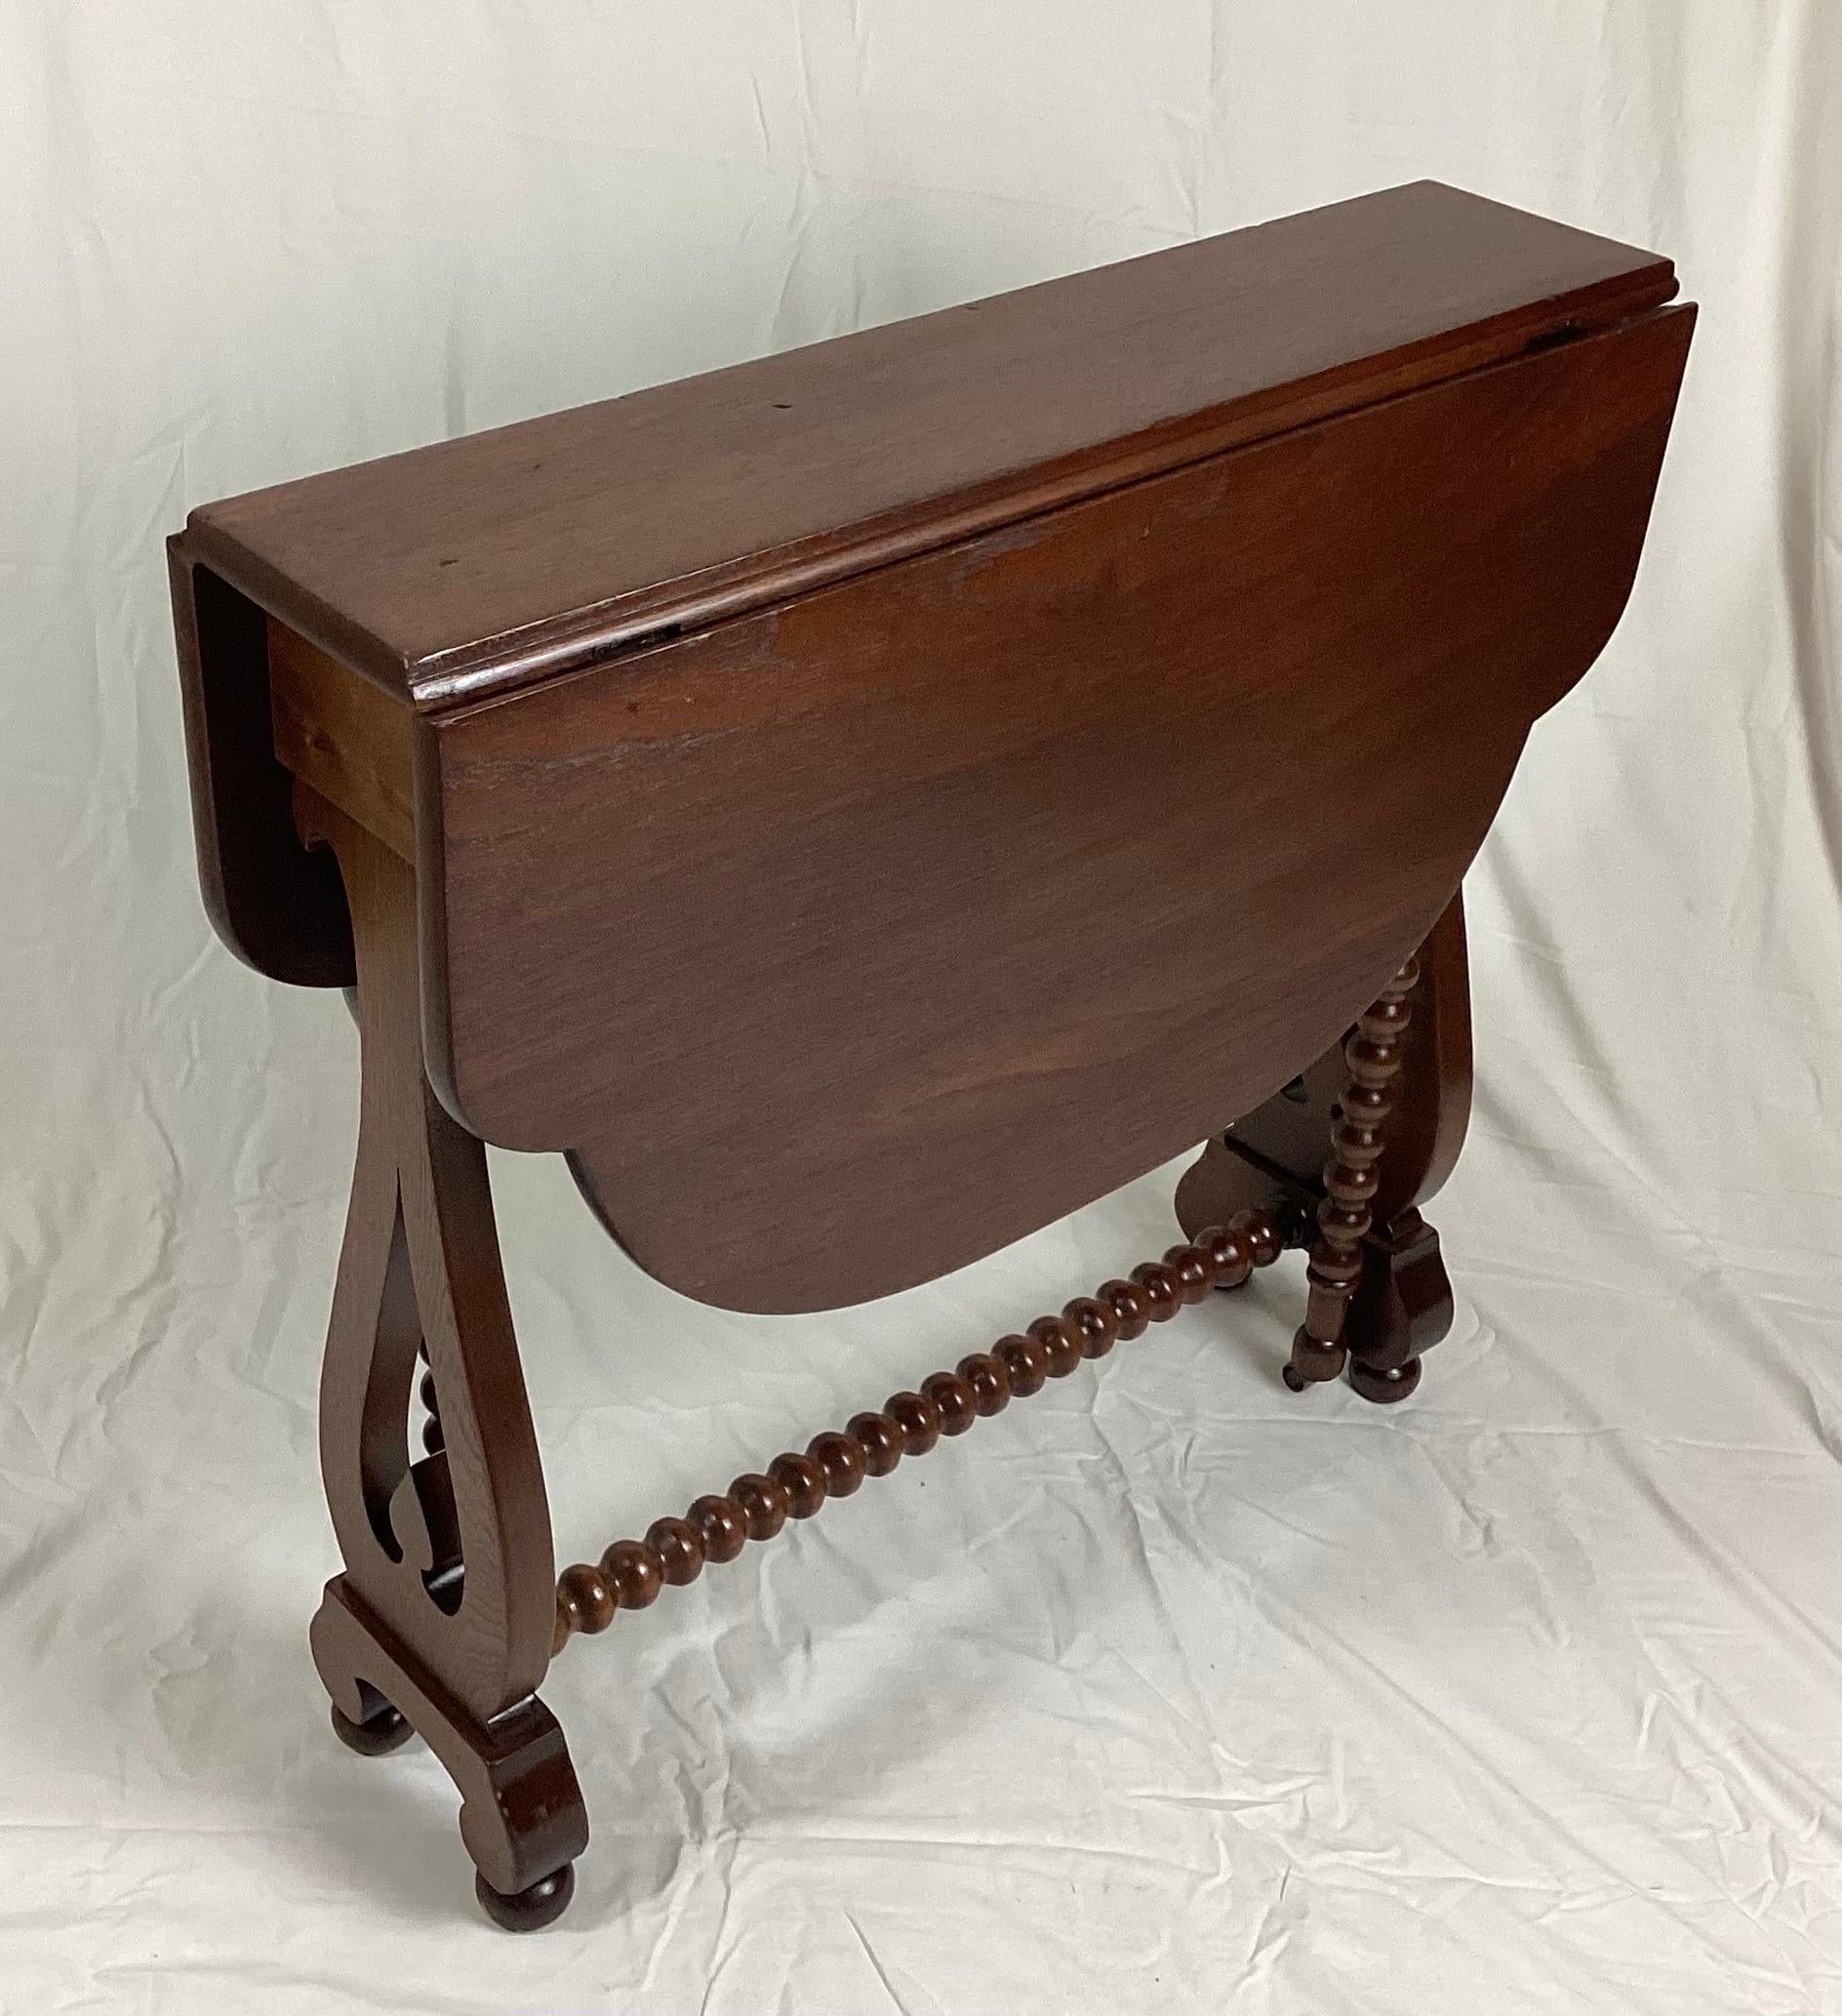 Walnut narrow small tuck-a-way drop leaf table with Barley Twist Legs. Closed it is only 8